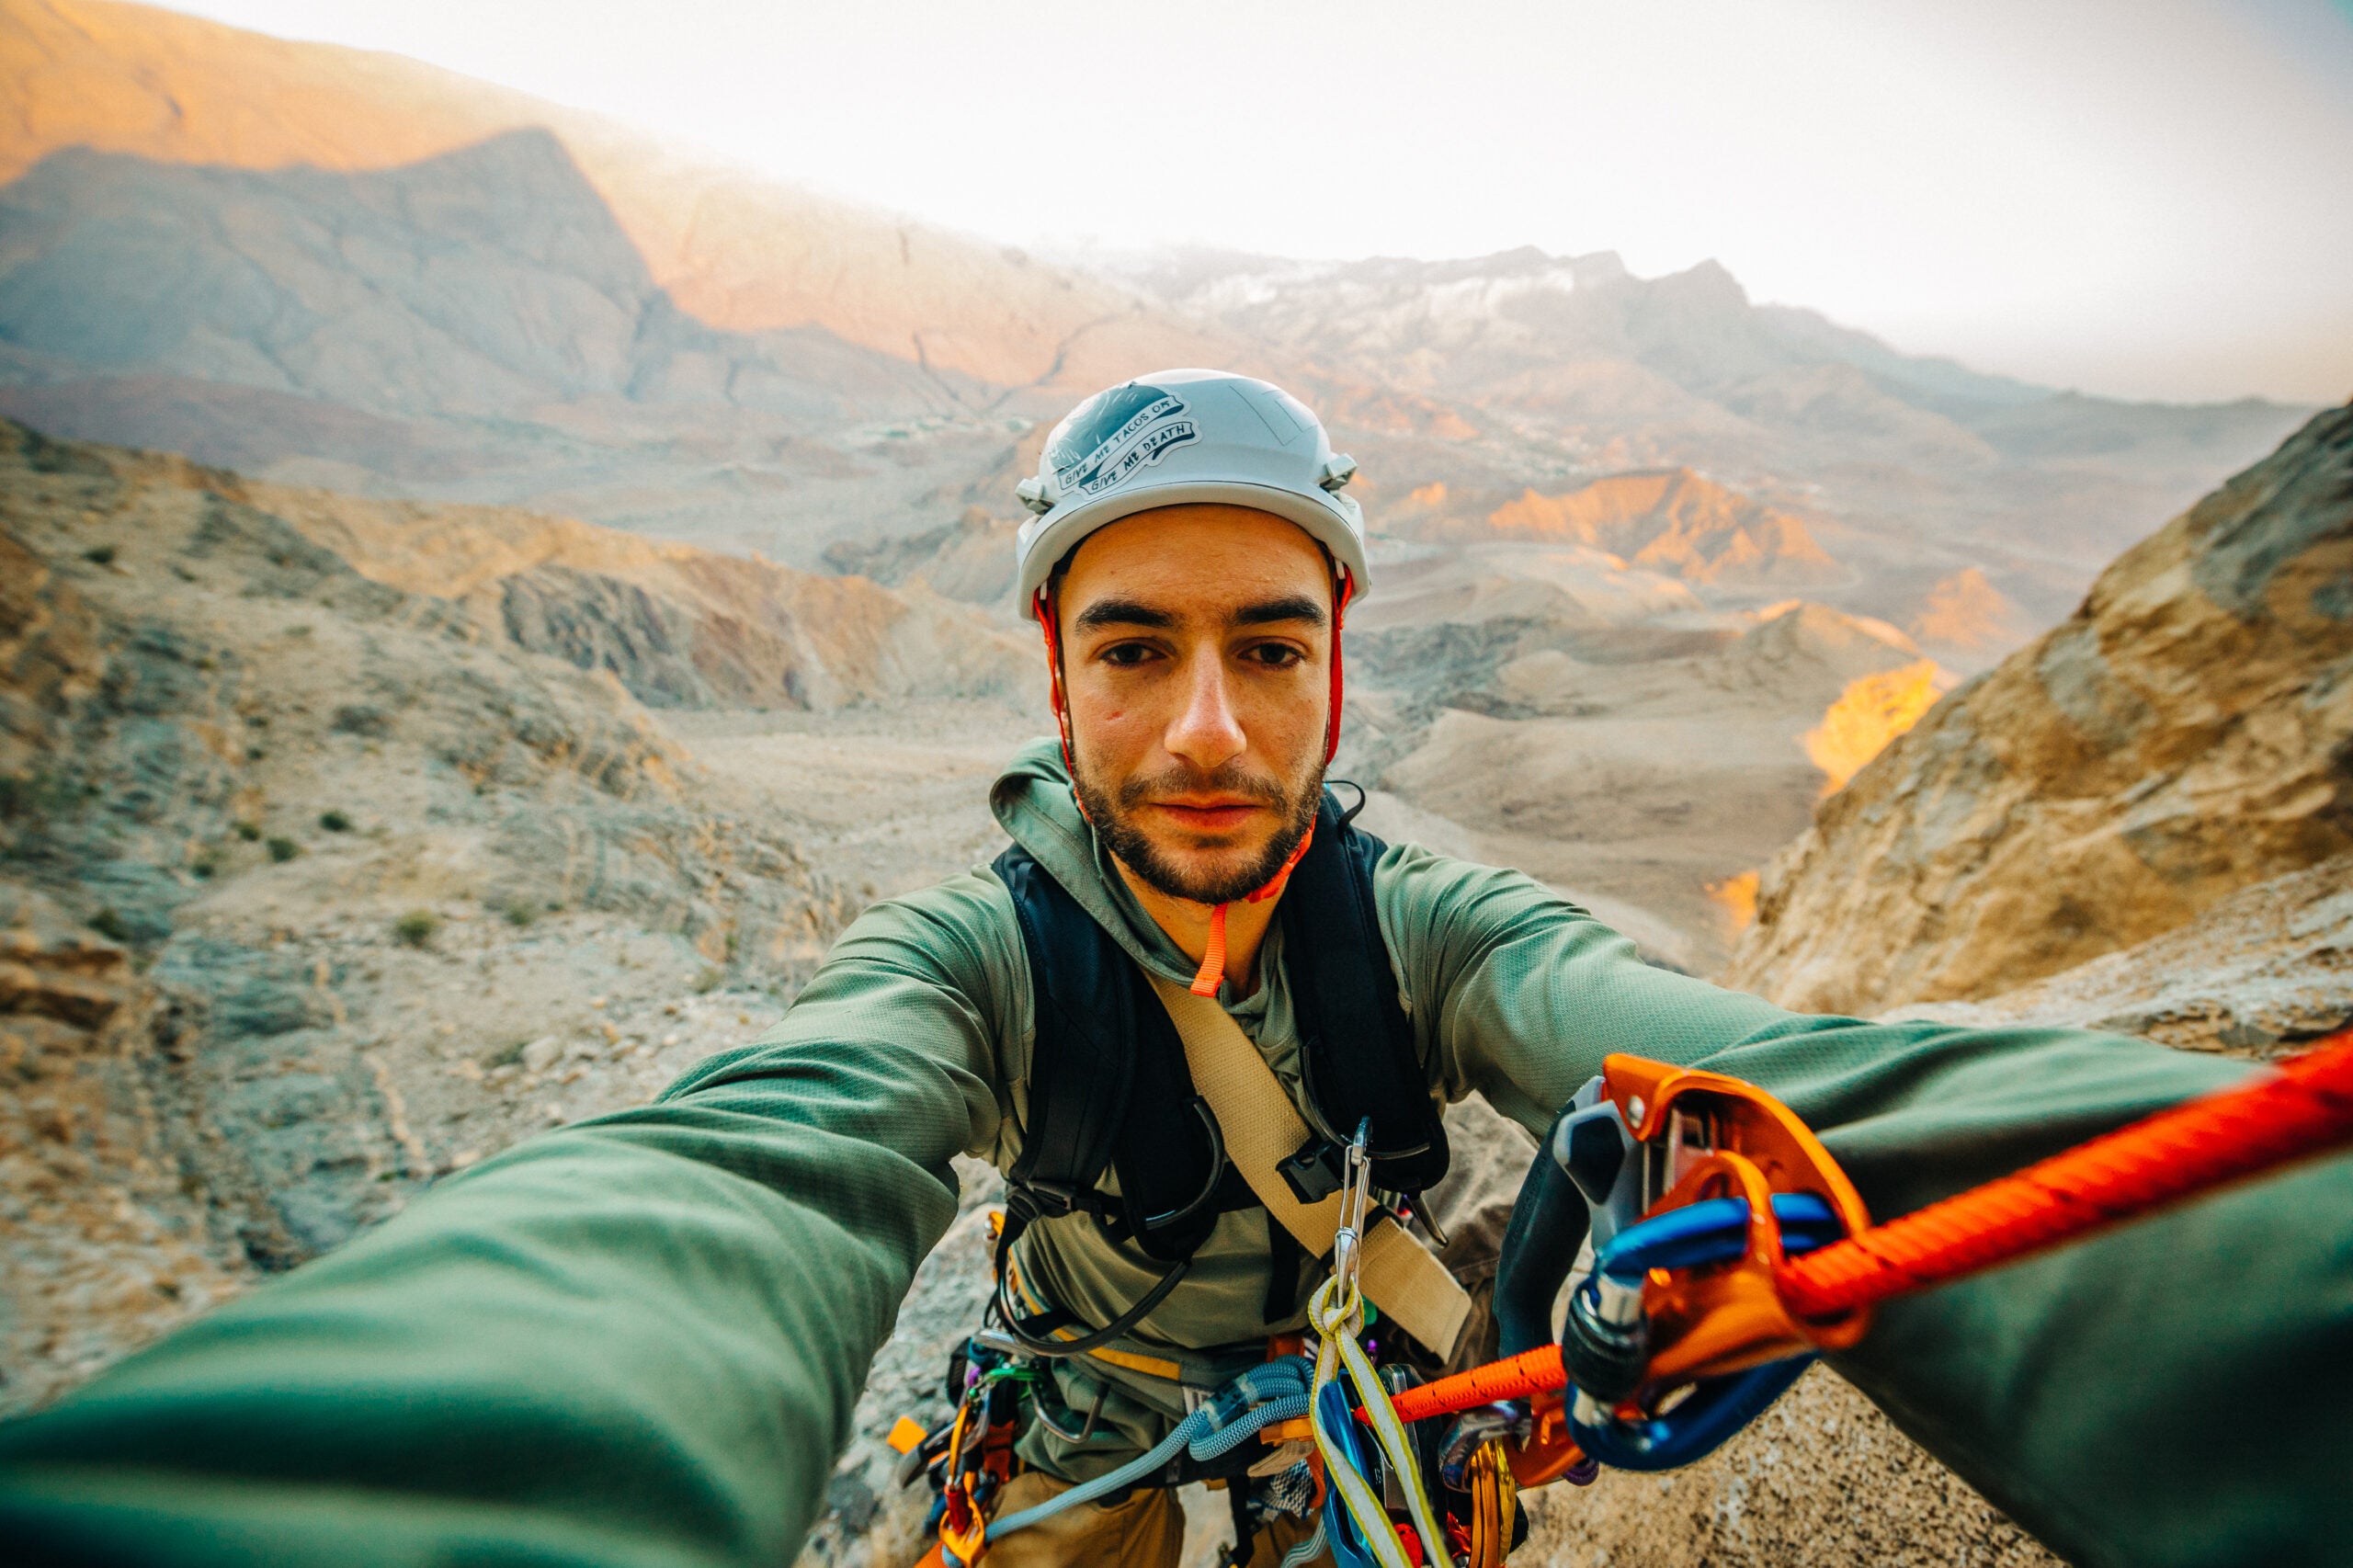 Meet Will Saunders: Gnarly athlete & photographer